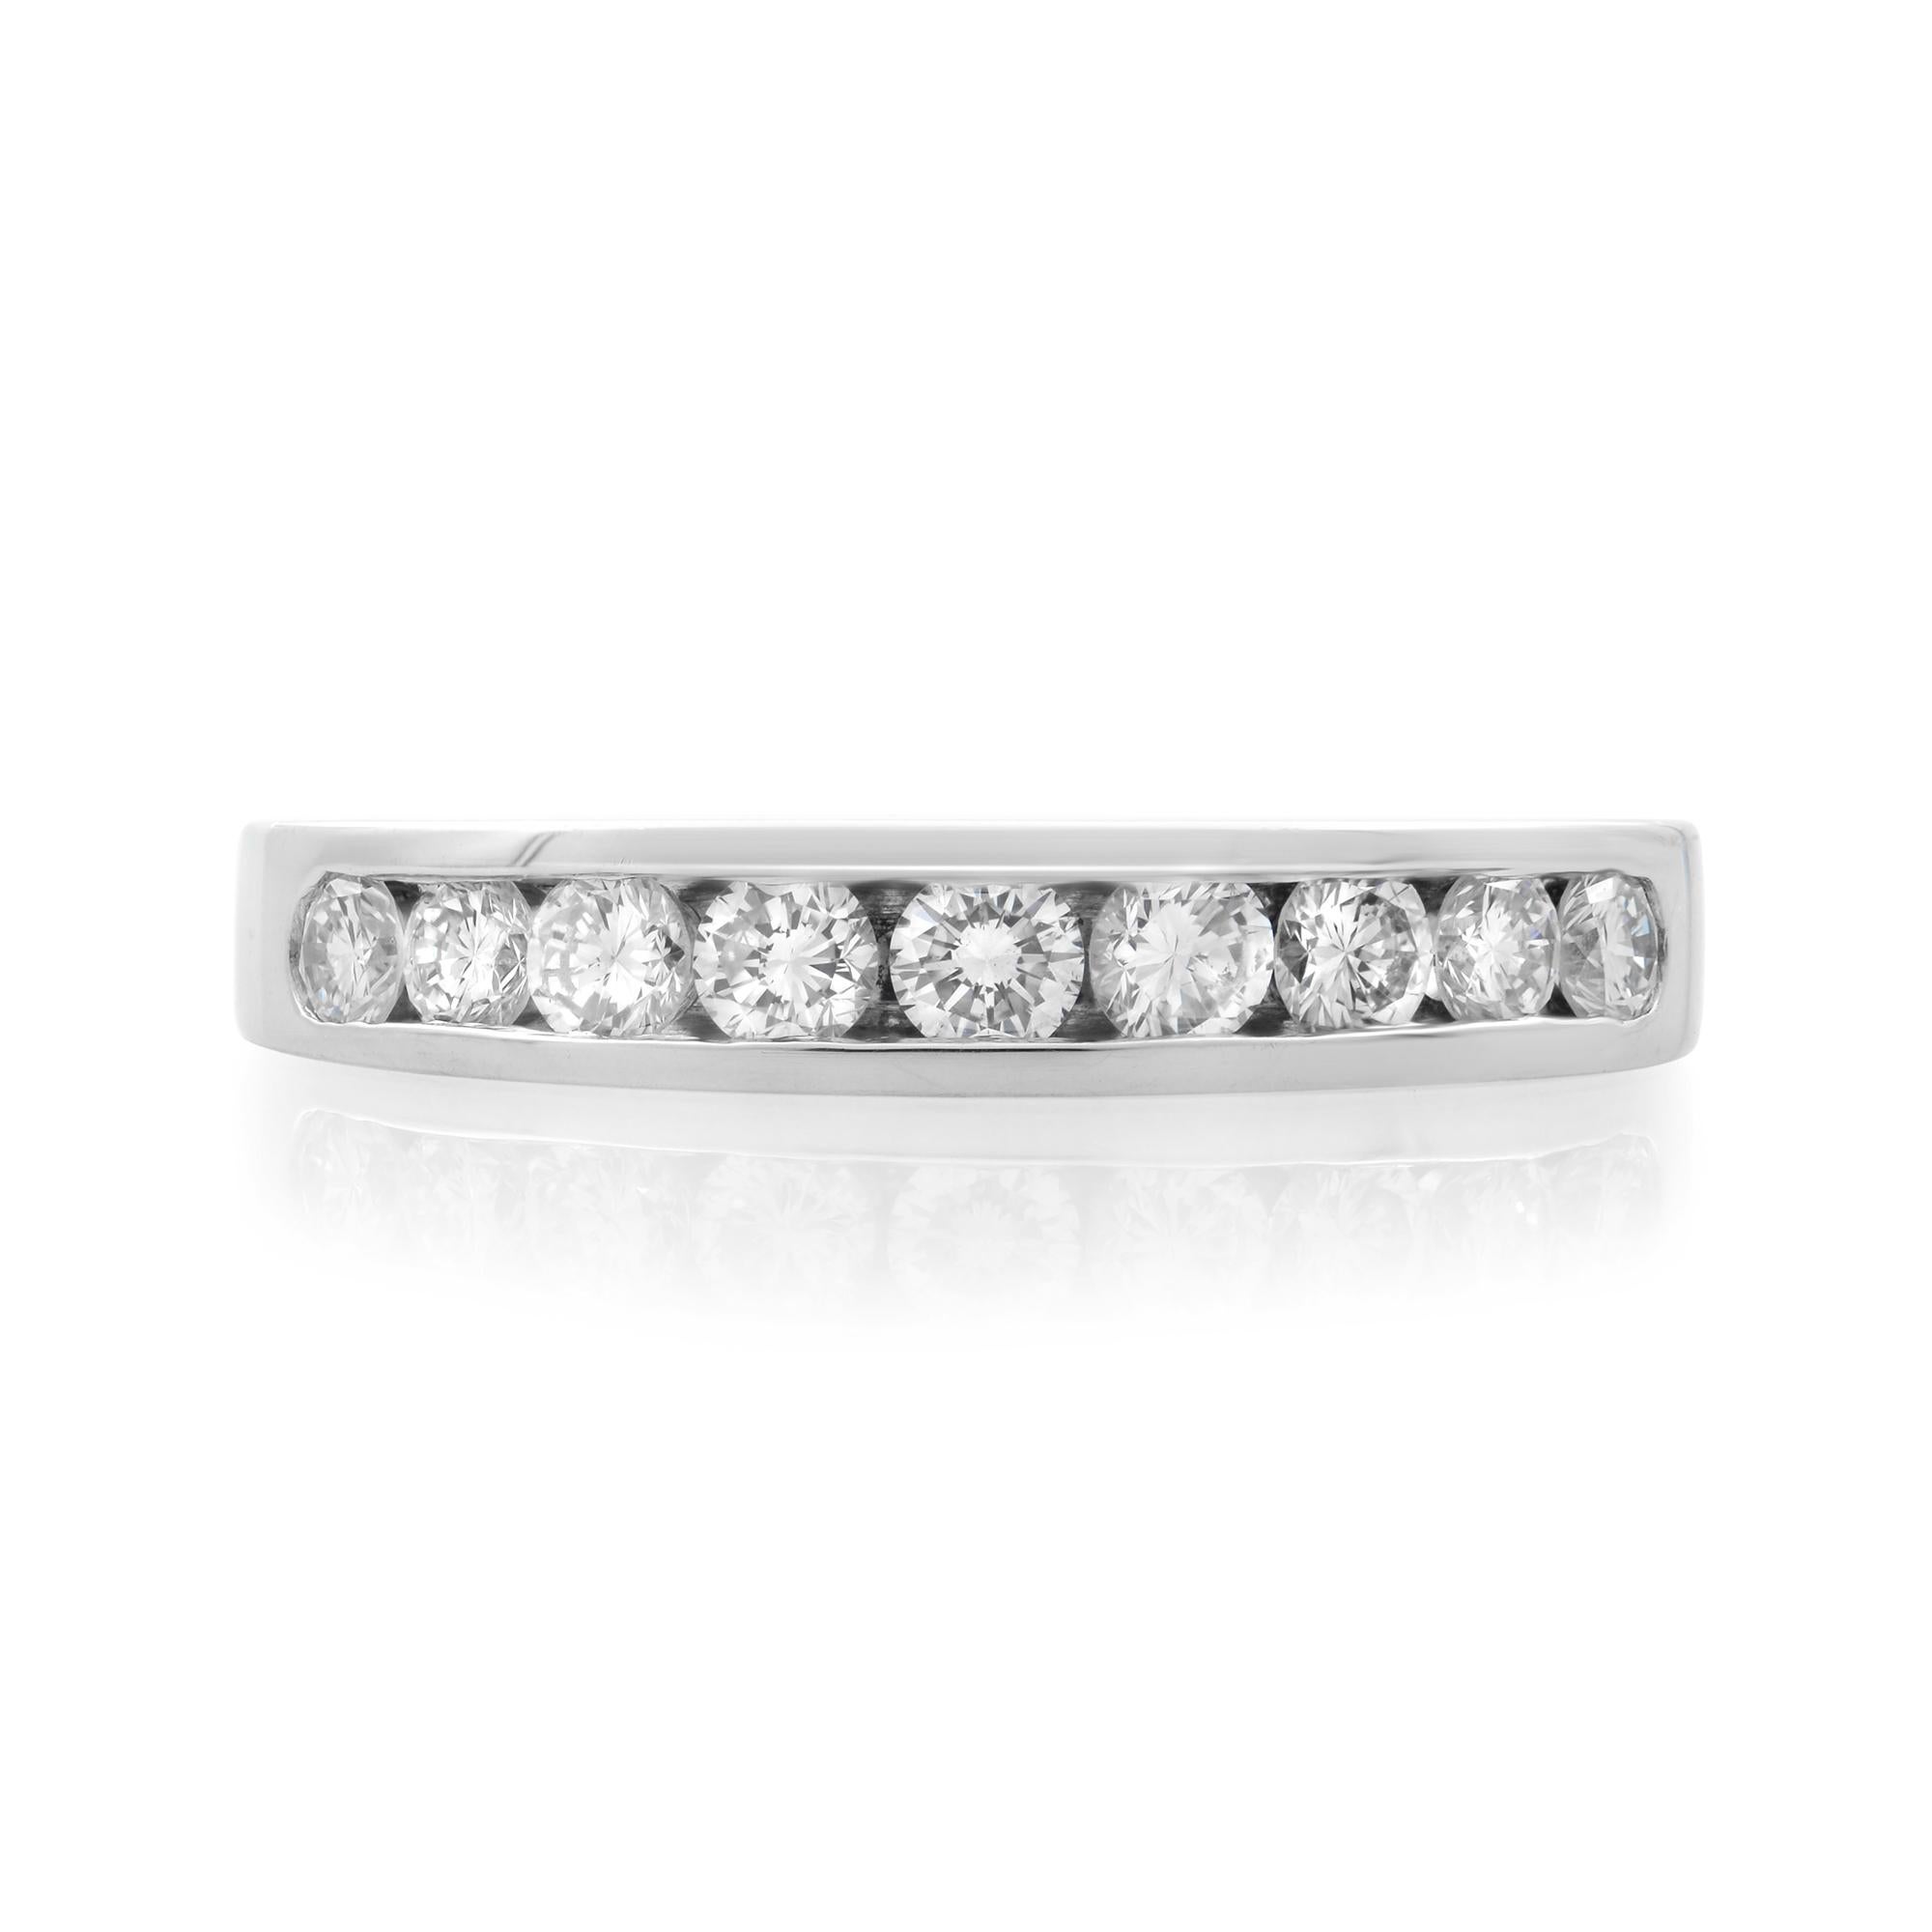 This classic women's ring band features 9 round brilliant cut natural diamonds. All diamonds are channel set in a solid platinum setting. Total carat weight: 0.50. Diamond color G and SI1 clarity. Band width: 3.50-2.50mm. Ring Size 7. Comes with a